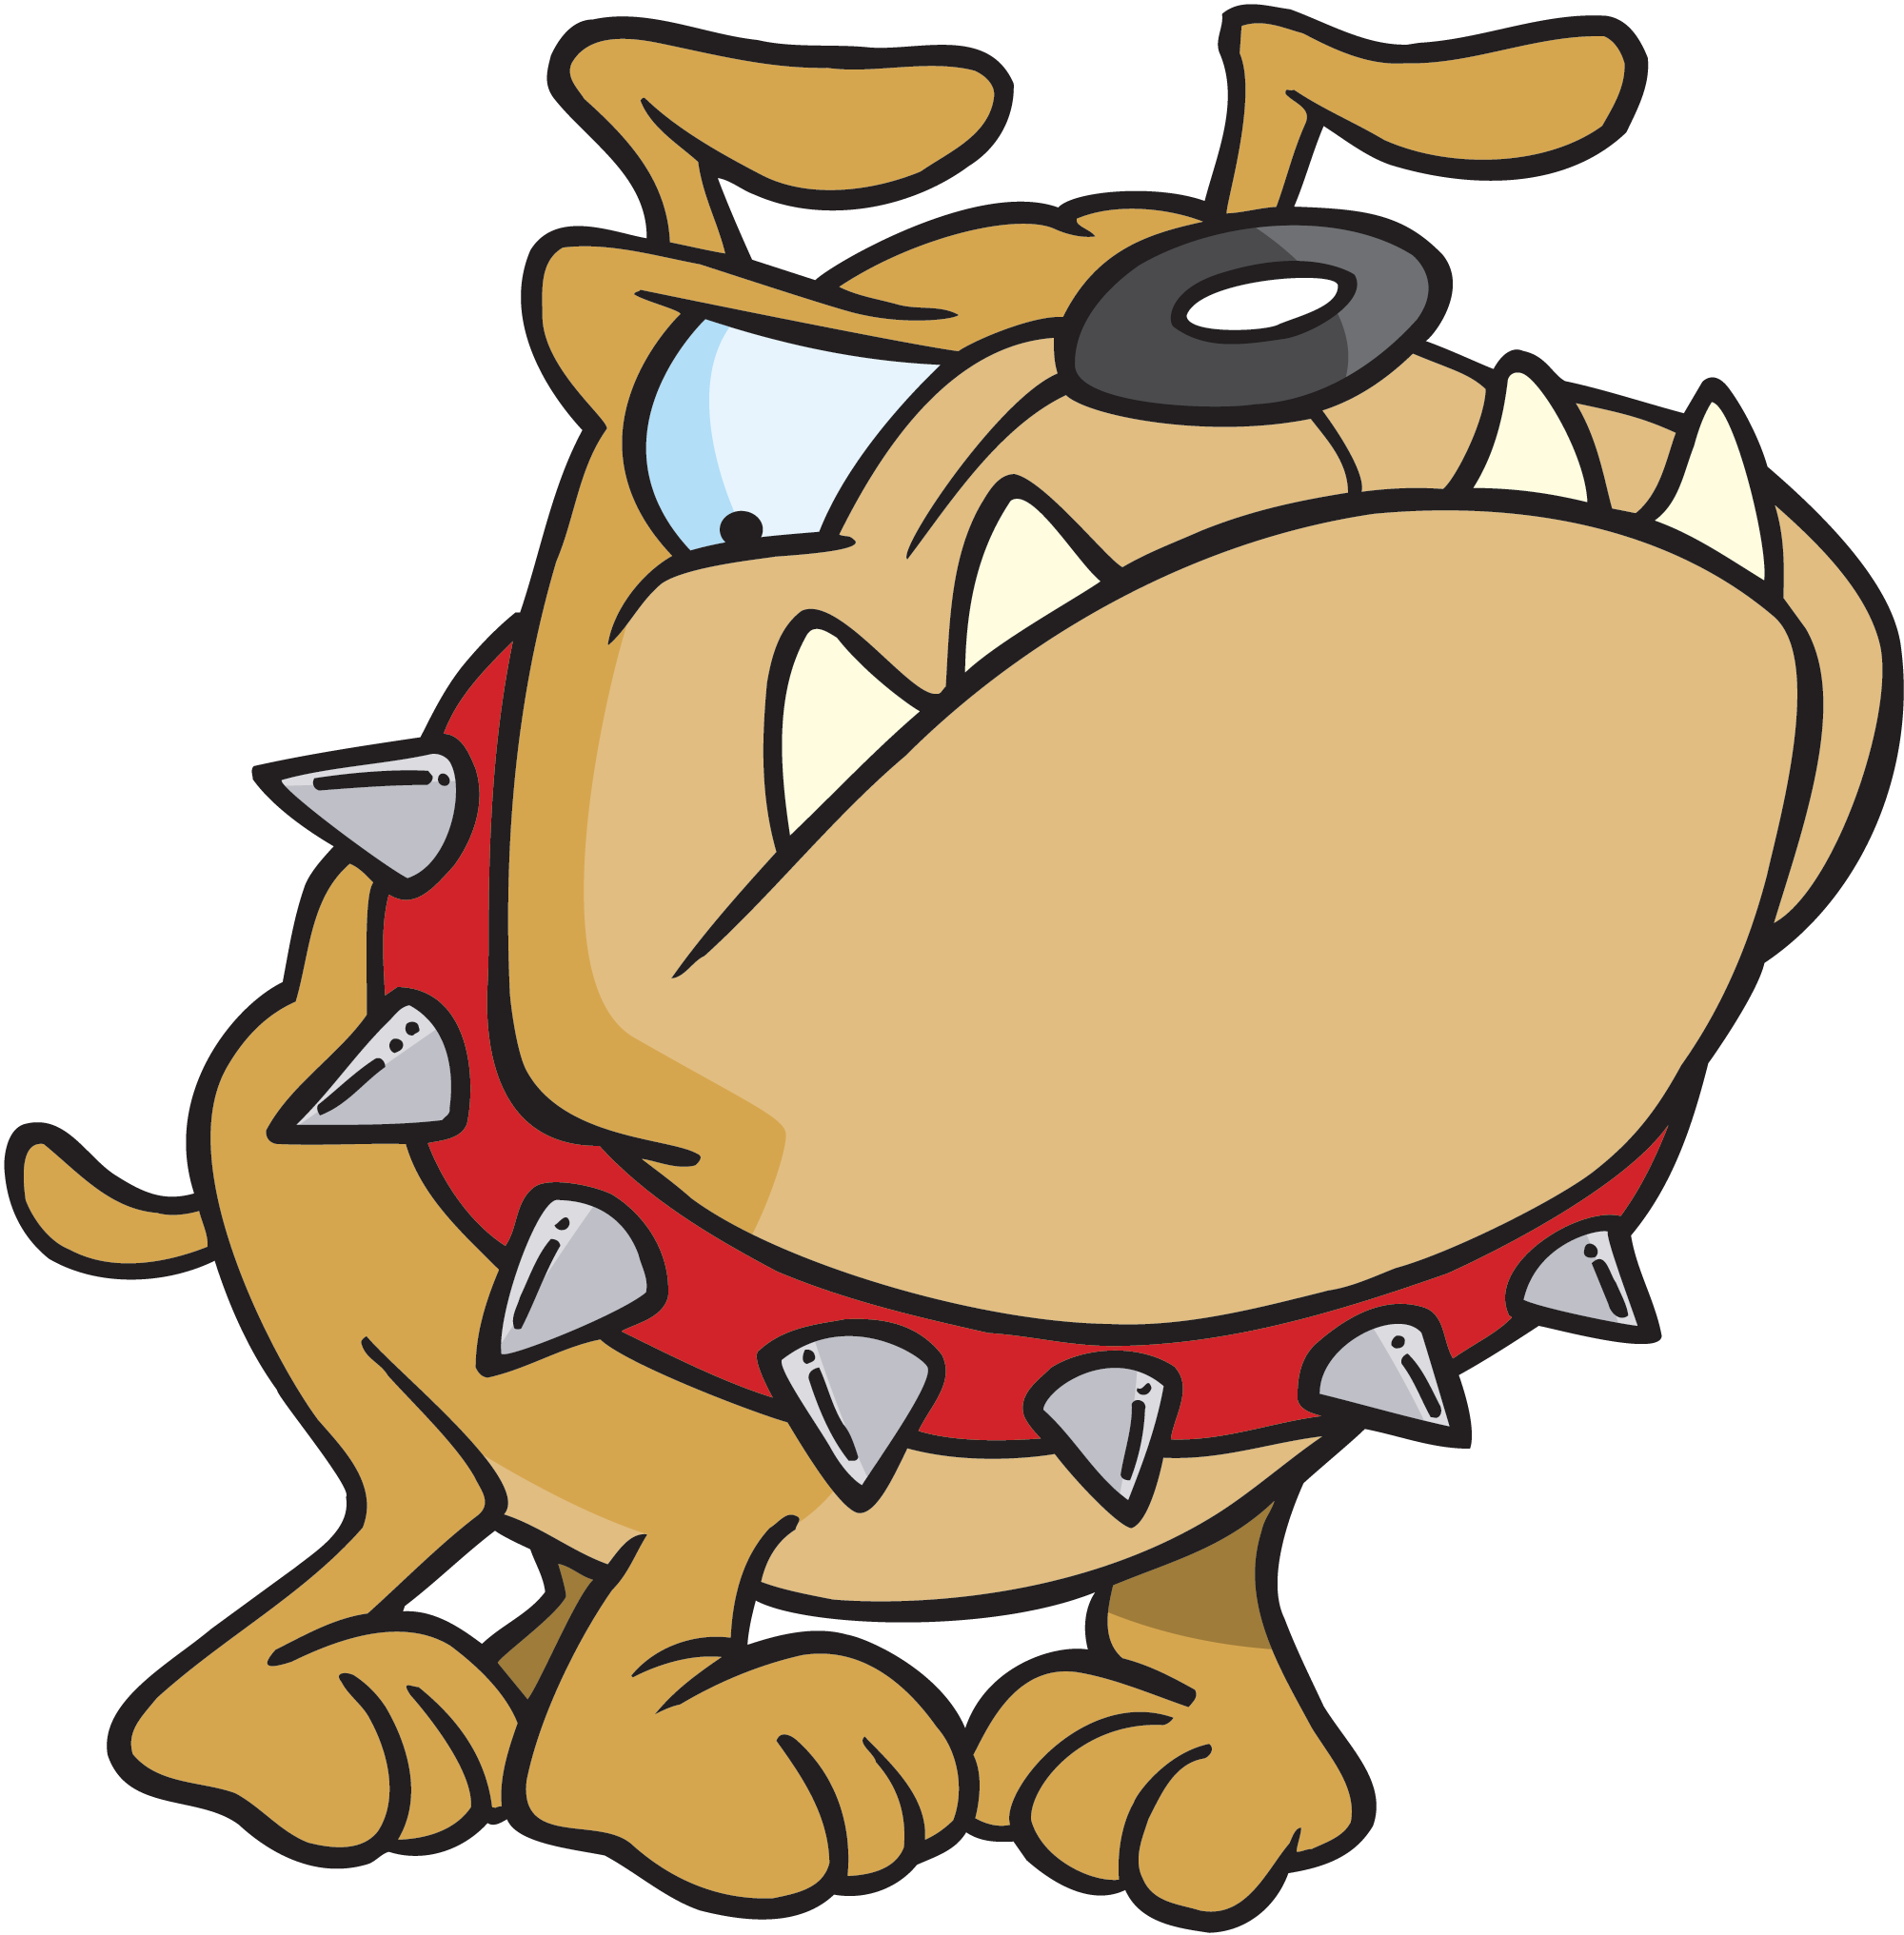 Mean Looking Cartoon Dogs Images & Pictures - Becuo